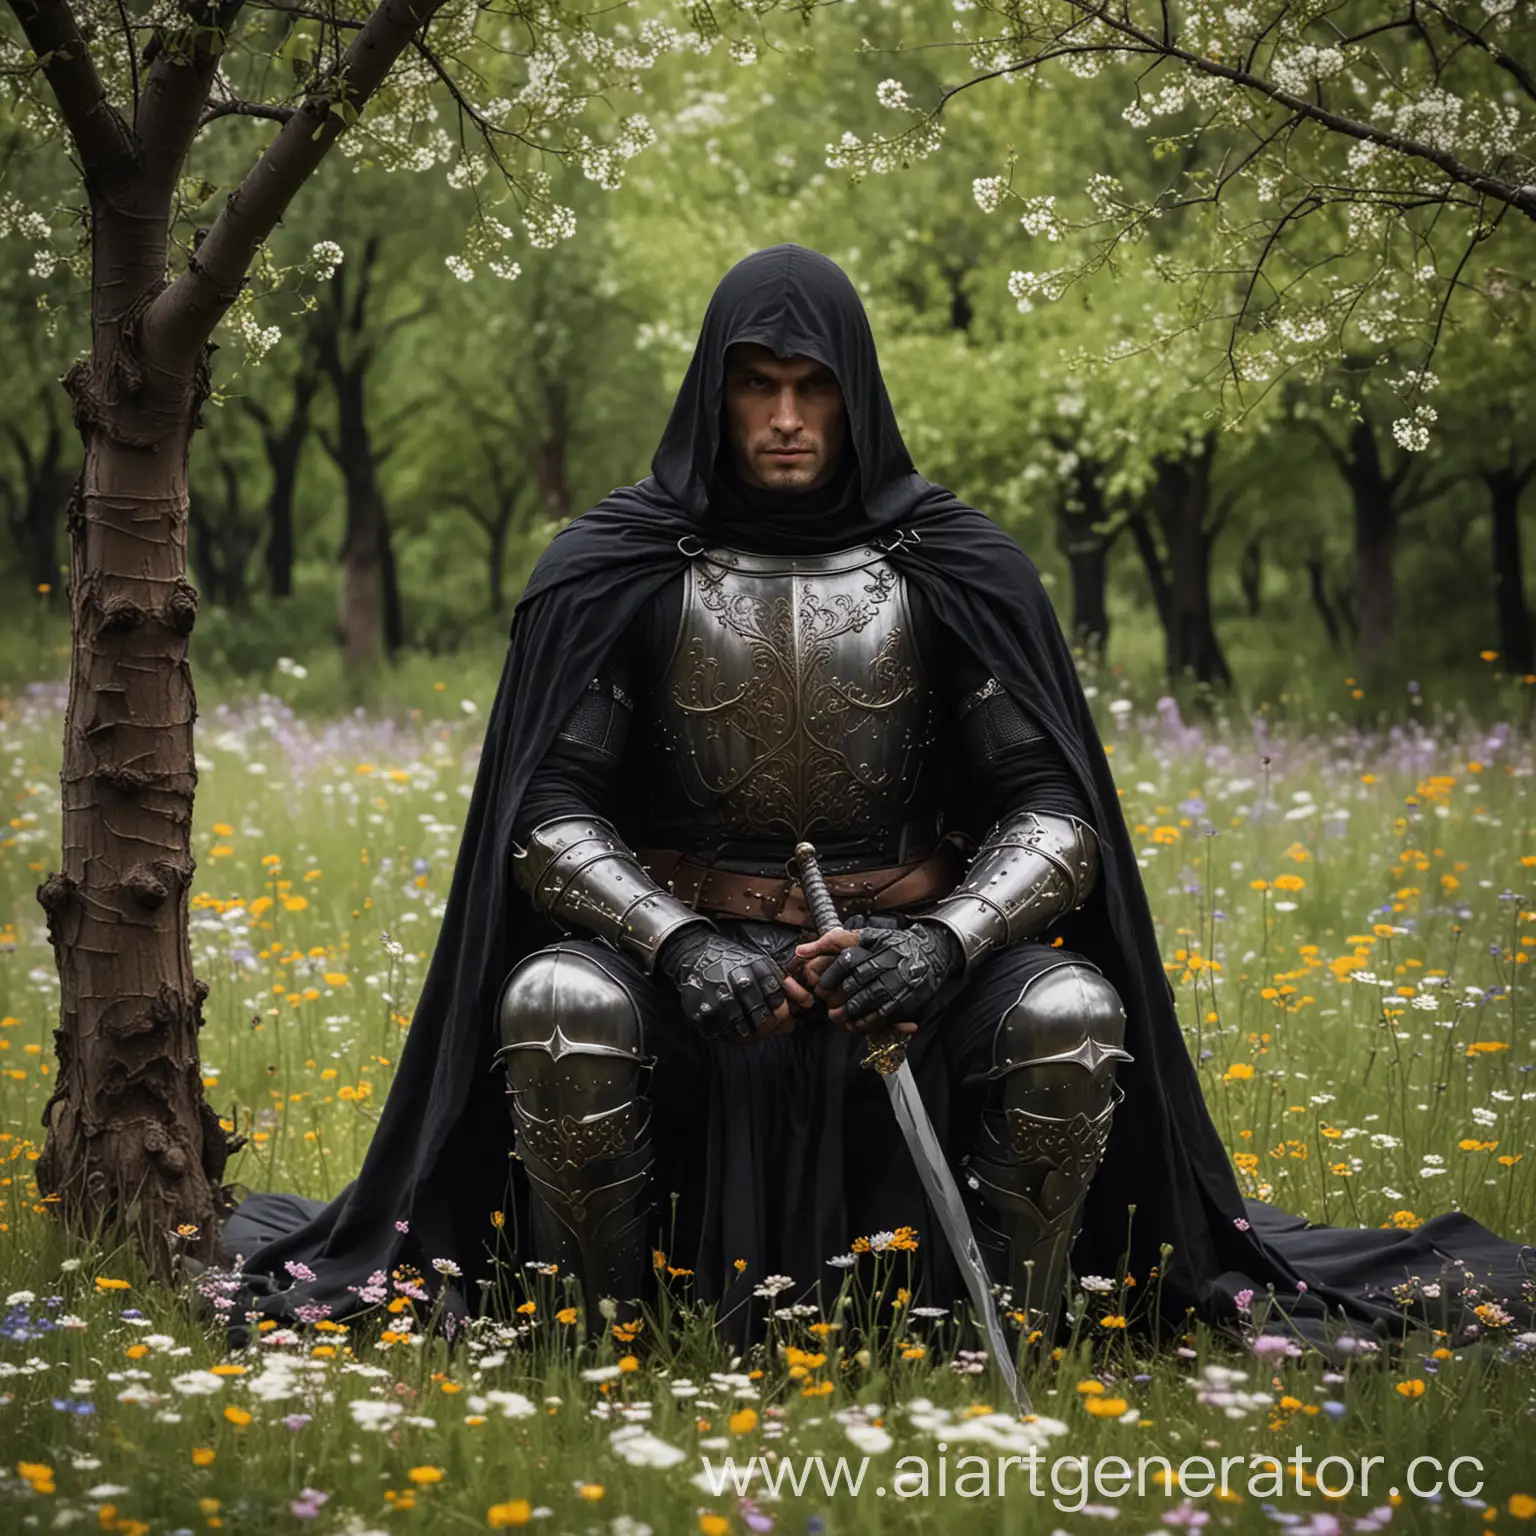 Majestic-Knight-Amidst-Blooming-Meadow-Dark-Armor-and-Sword